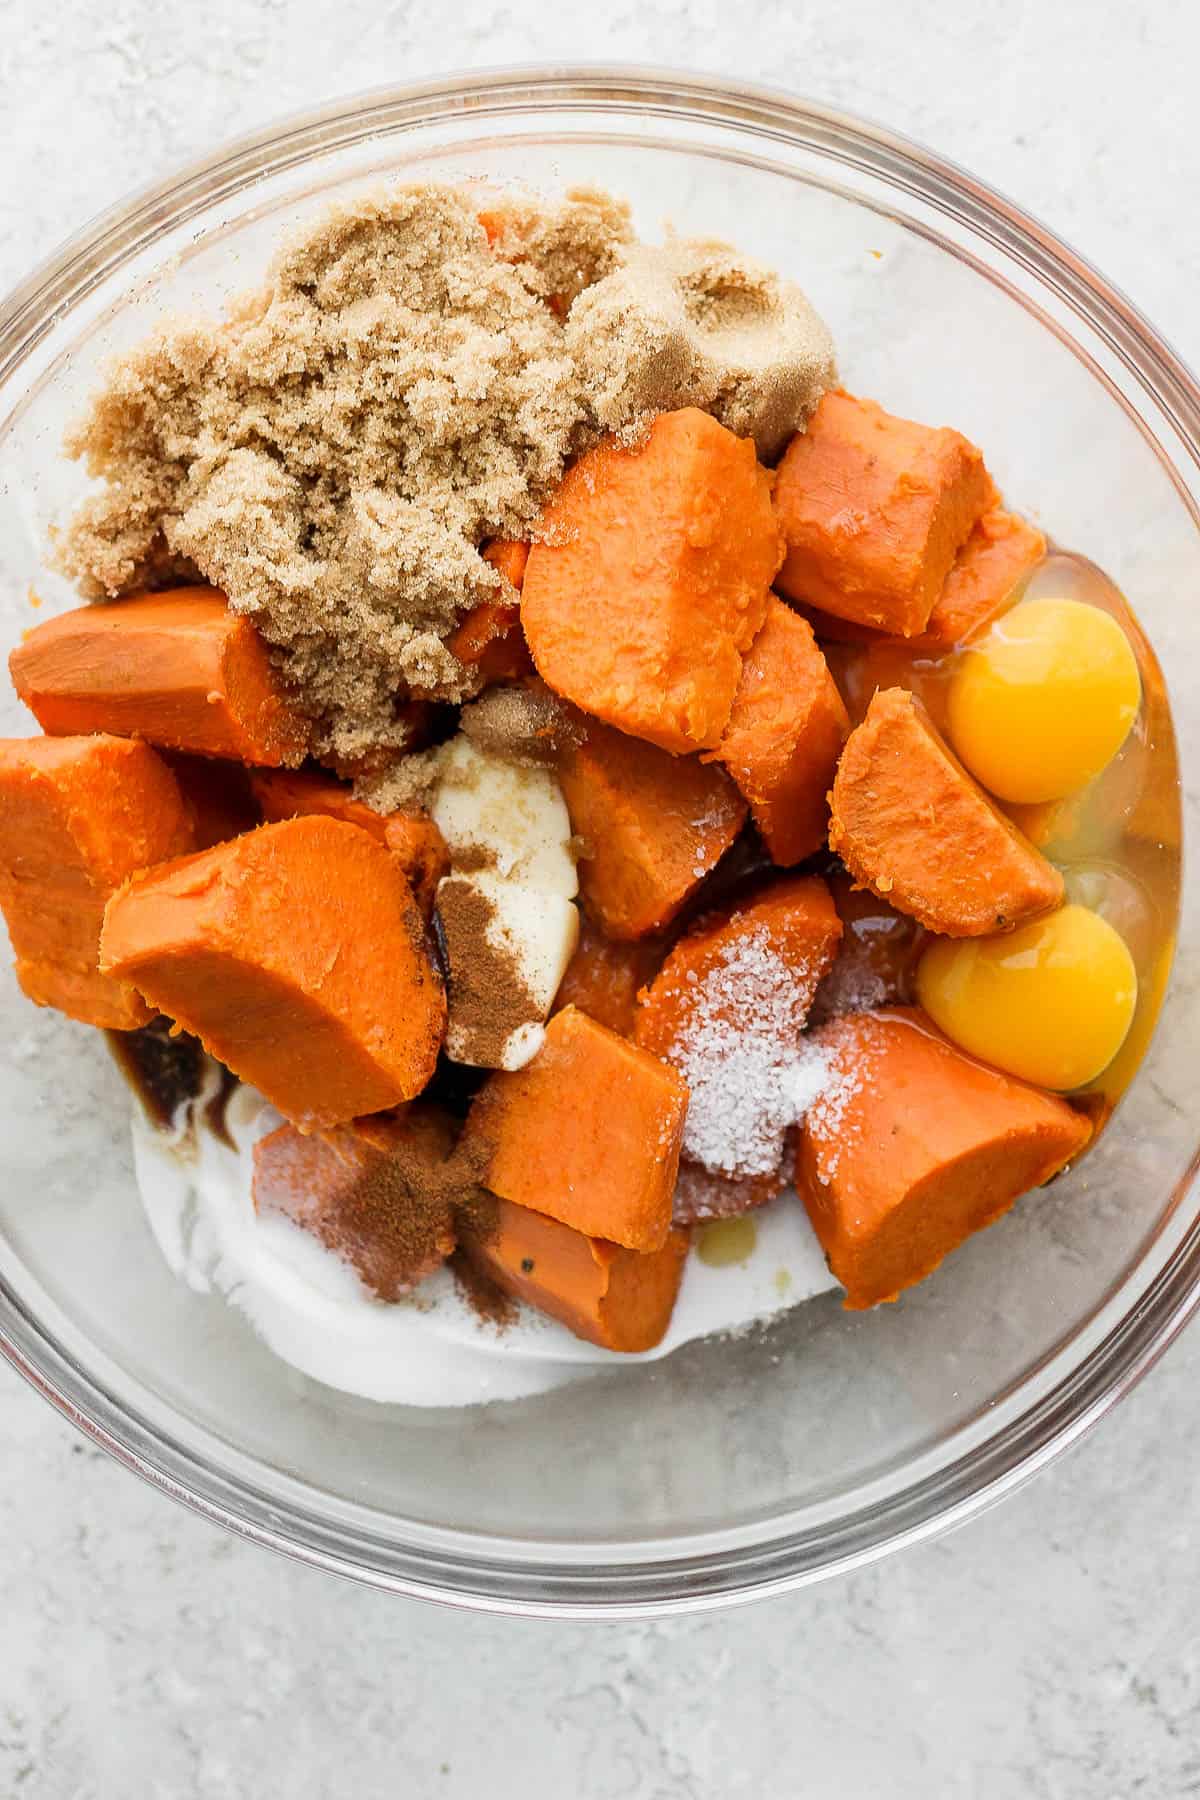 Boiled and cubed Sweet potatoes, brown sugar, eggs, salt, butter, full fat coconut milk, maple syrup, cinnamon, nutmeg, and vanilla in a mixing bowl.